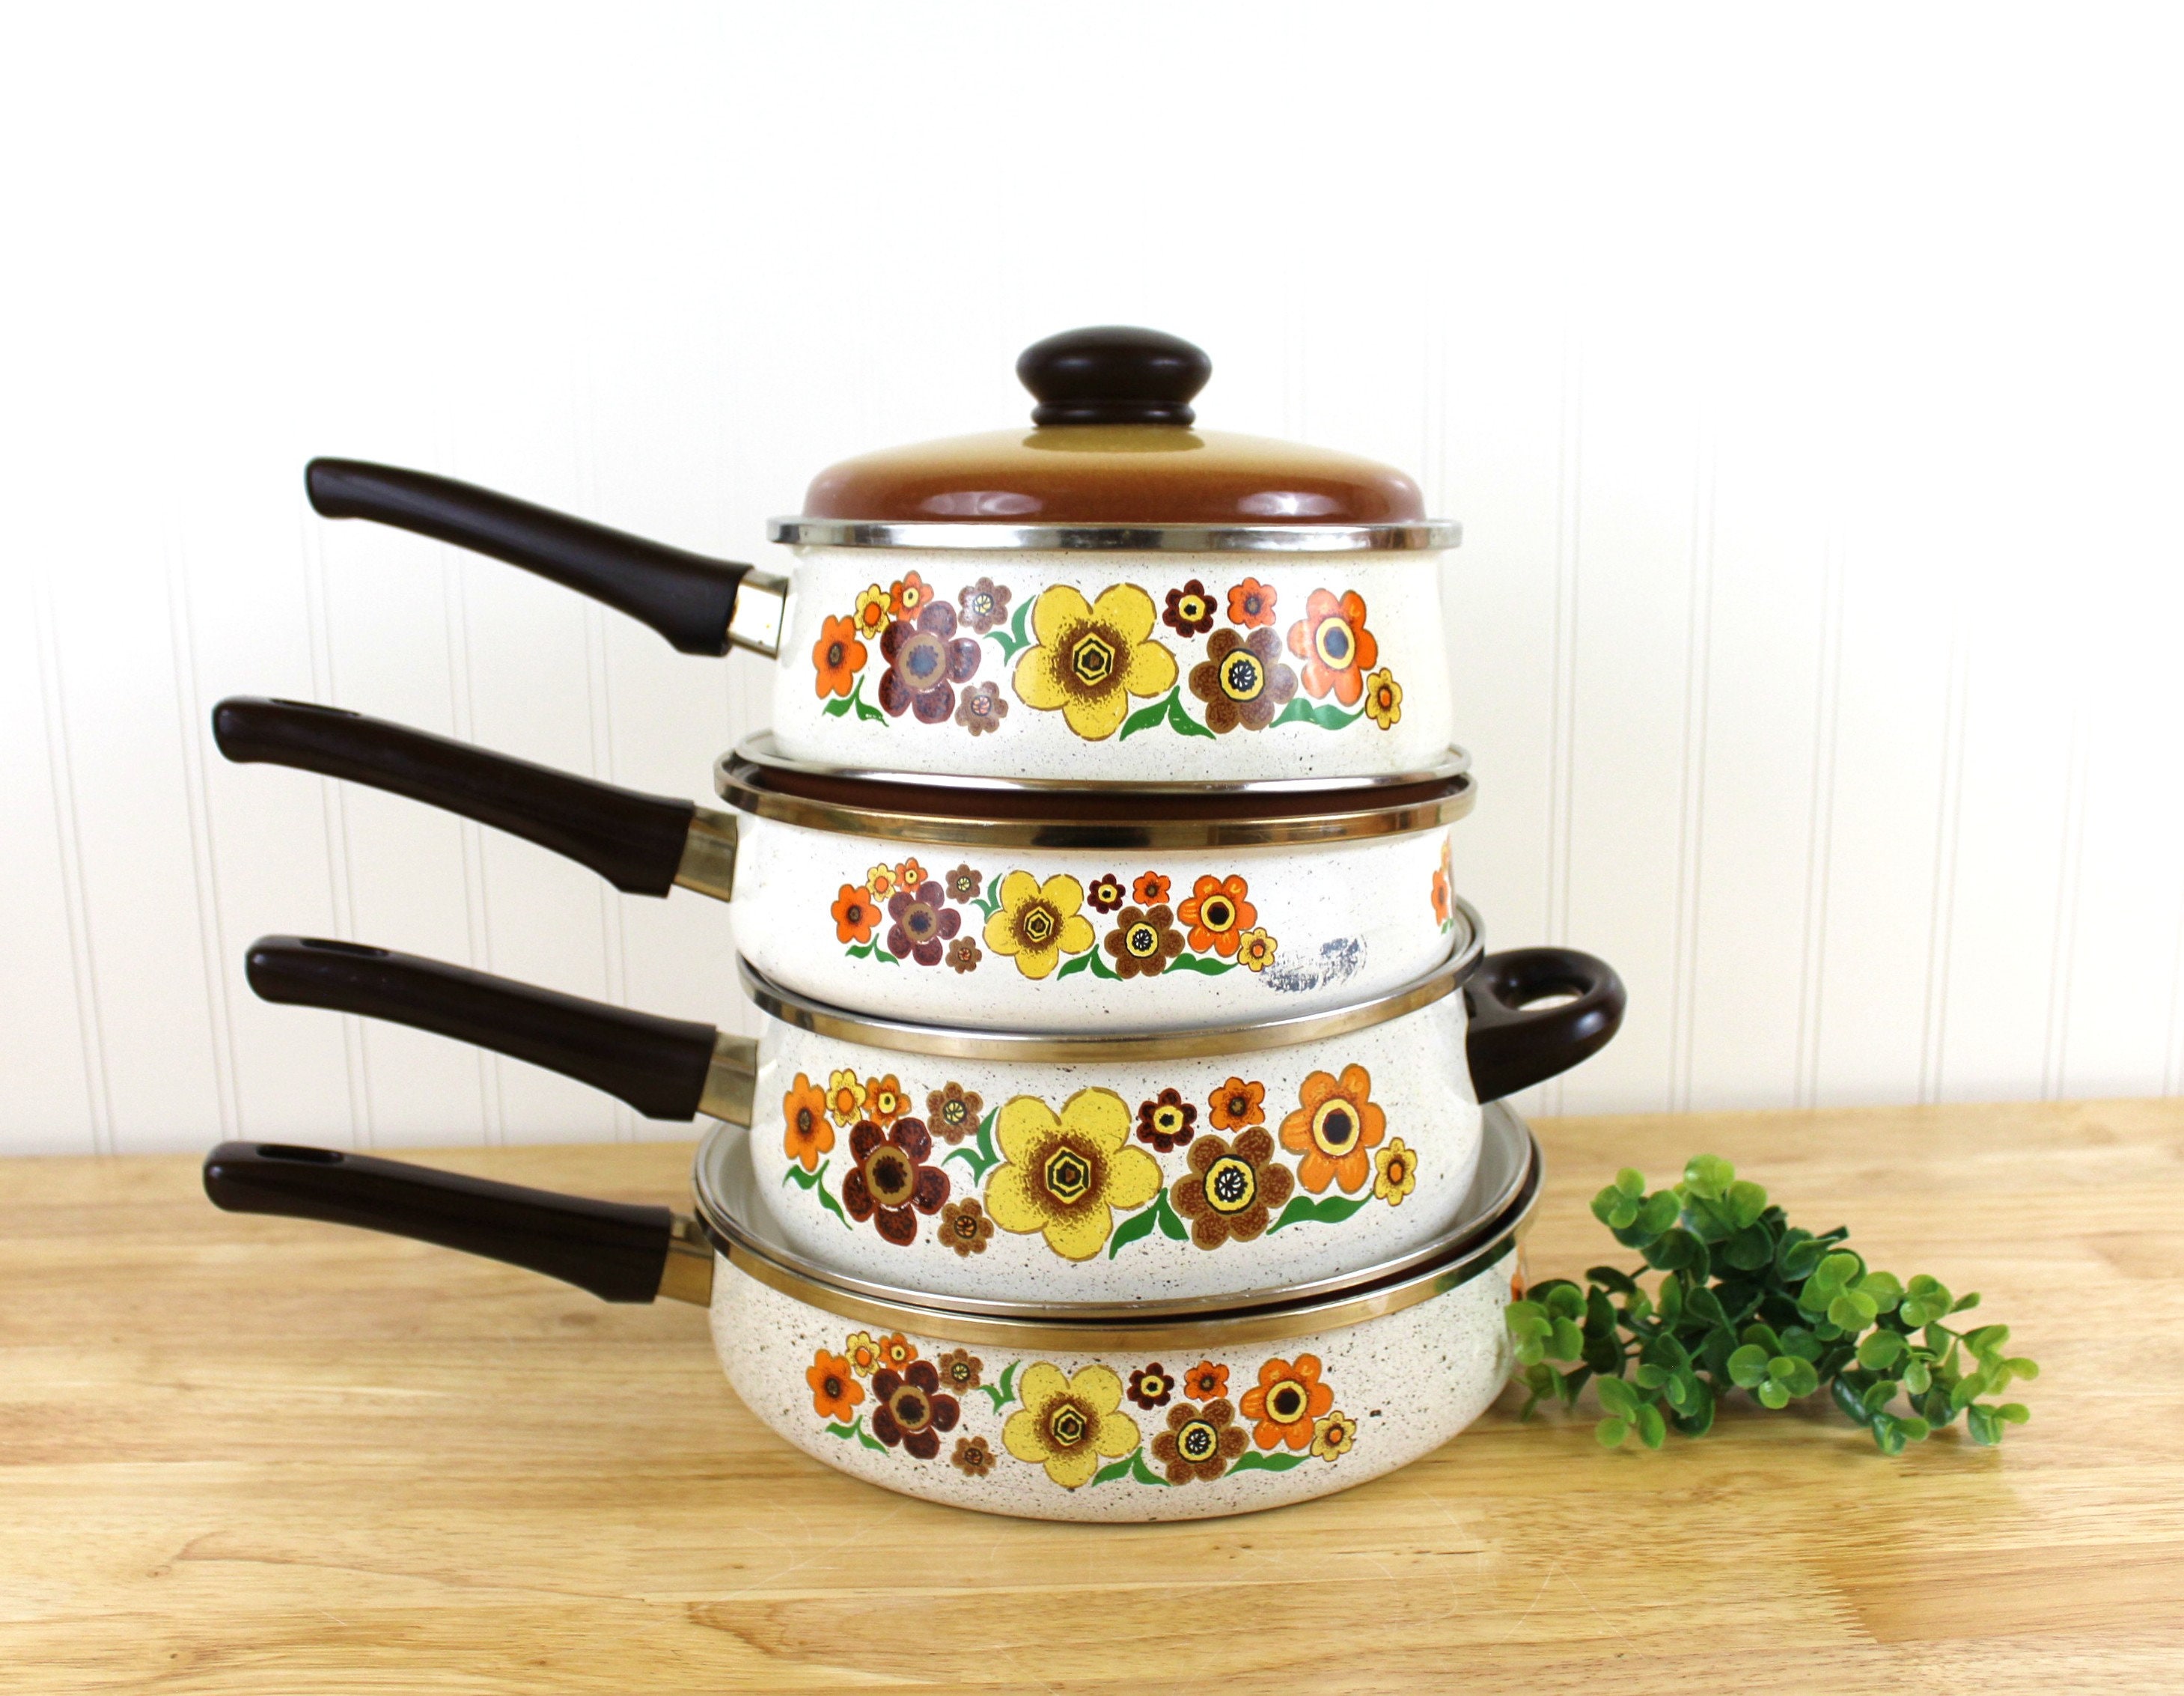 Vintage Handcrafted 8 Piece Crowning Touch Porcelain Enamel Cookware  Harvest Blossom Pattern. Made in Spain. Original Box. 